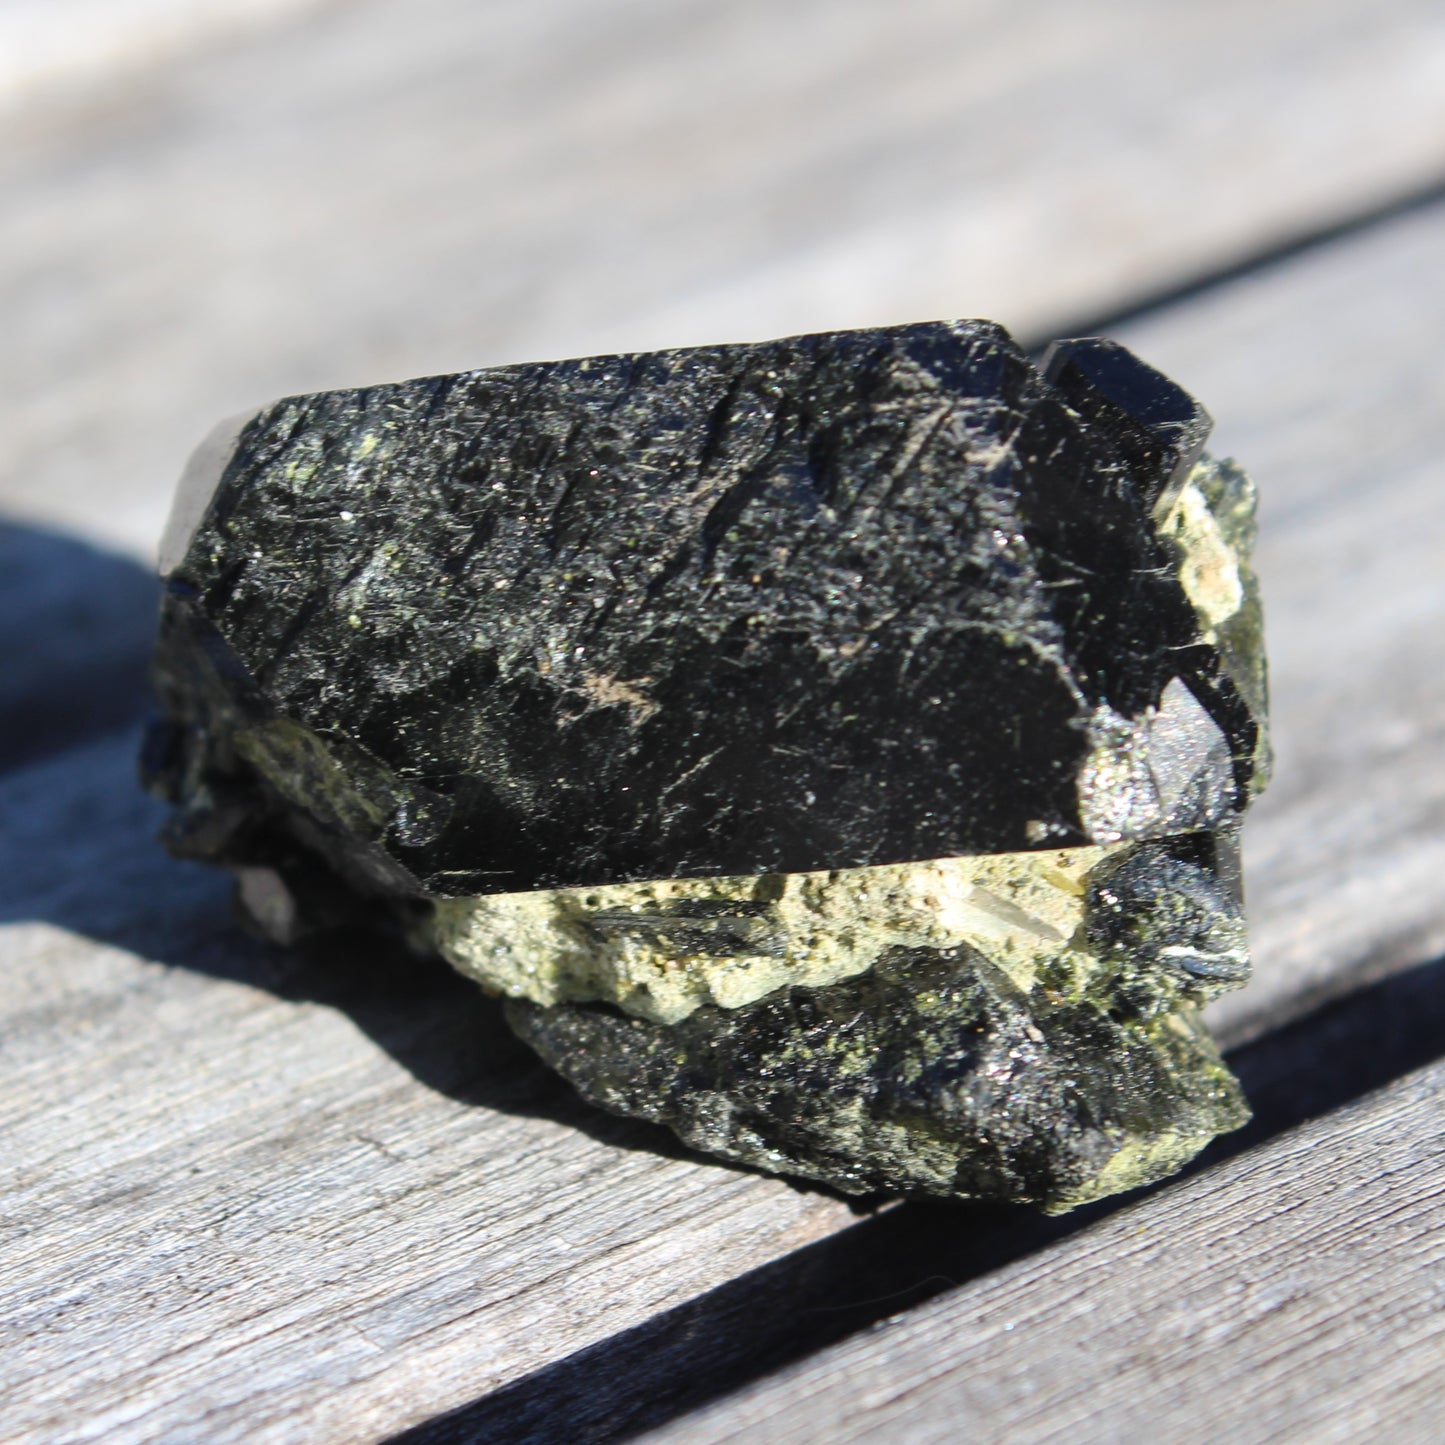 Epidote cluster from Afghanistan 59g